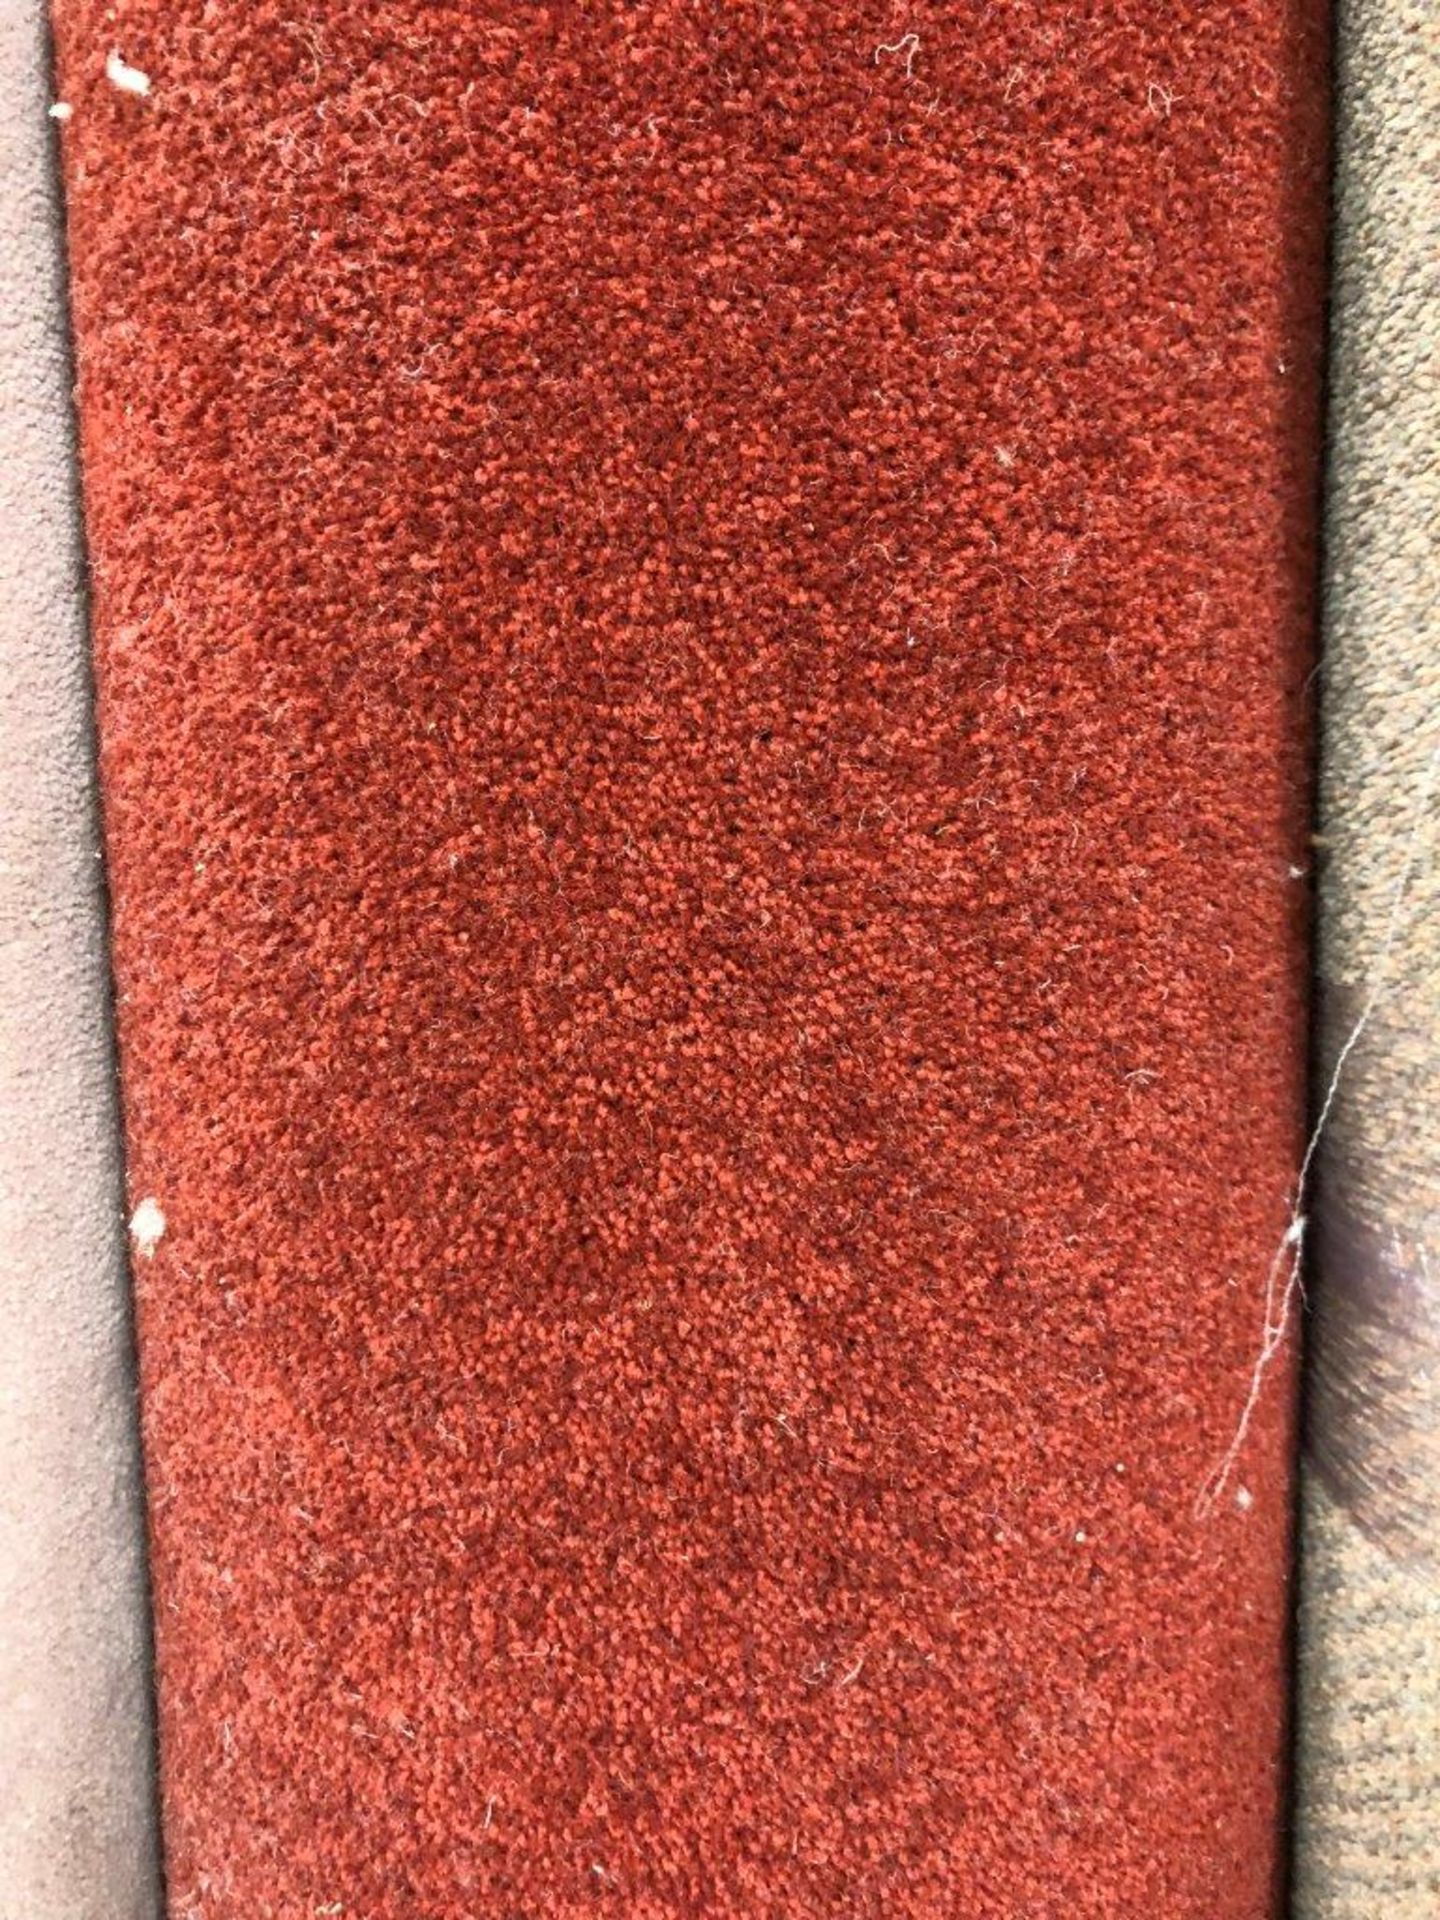 1 x Ryalux Carpet End Roll - Red 5.3x4.0m2 - Image 3 of 3